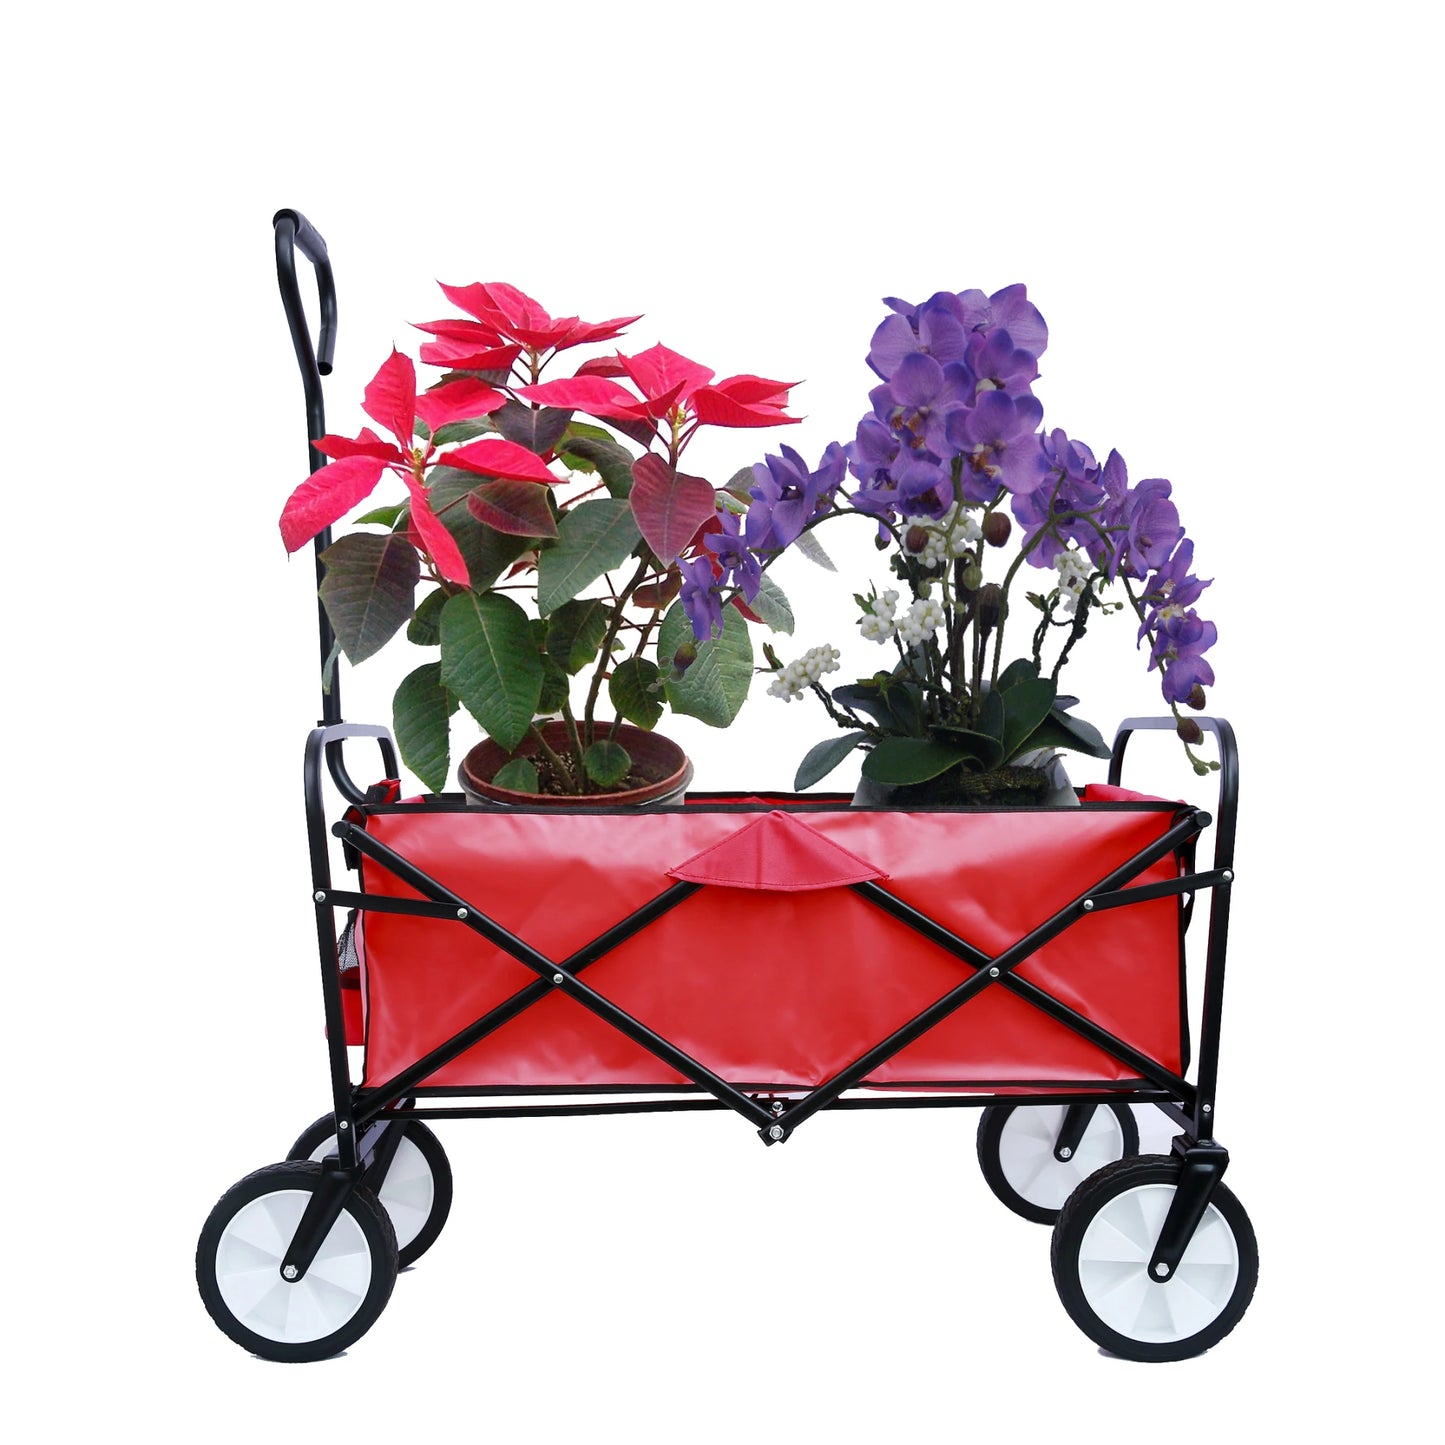 Folding Wagon Garden Cart - Large Capacity Utility Grocery Shopping Beach Carts with Wheels Moving Trolley for Outdoor